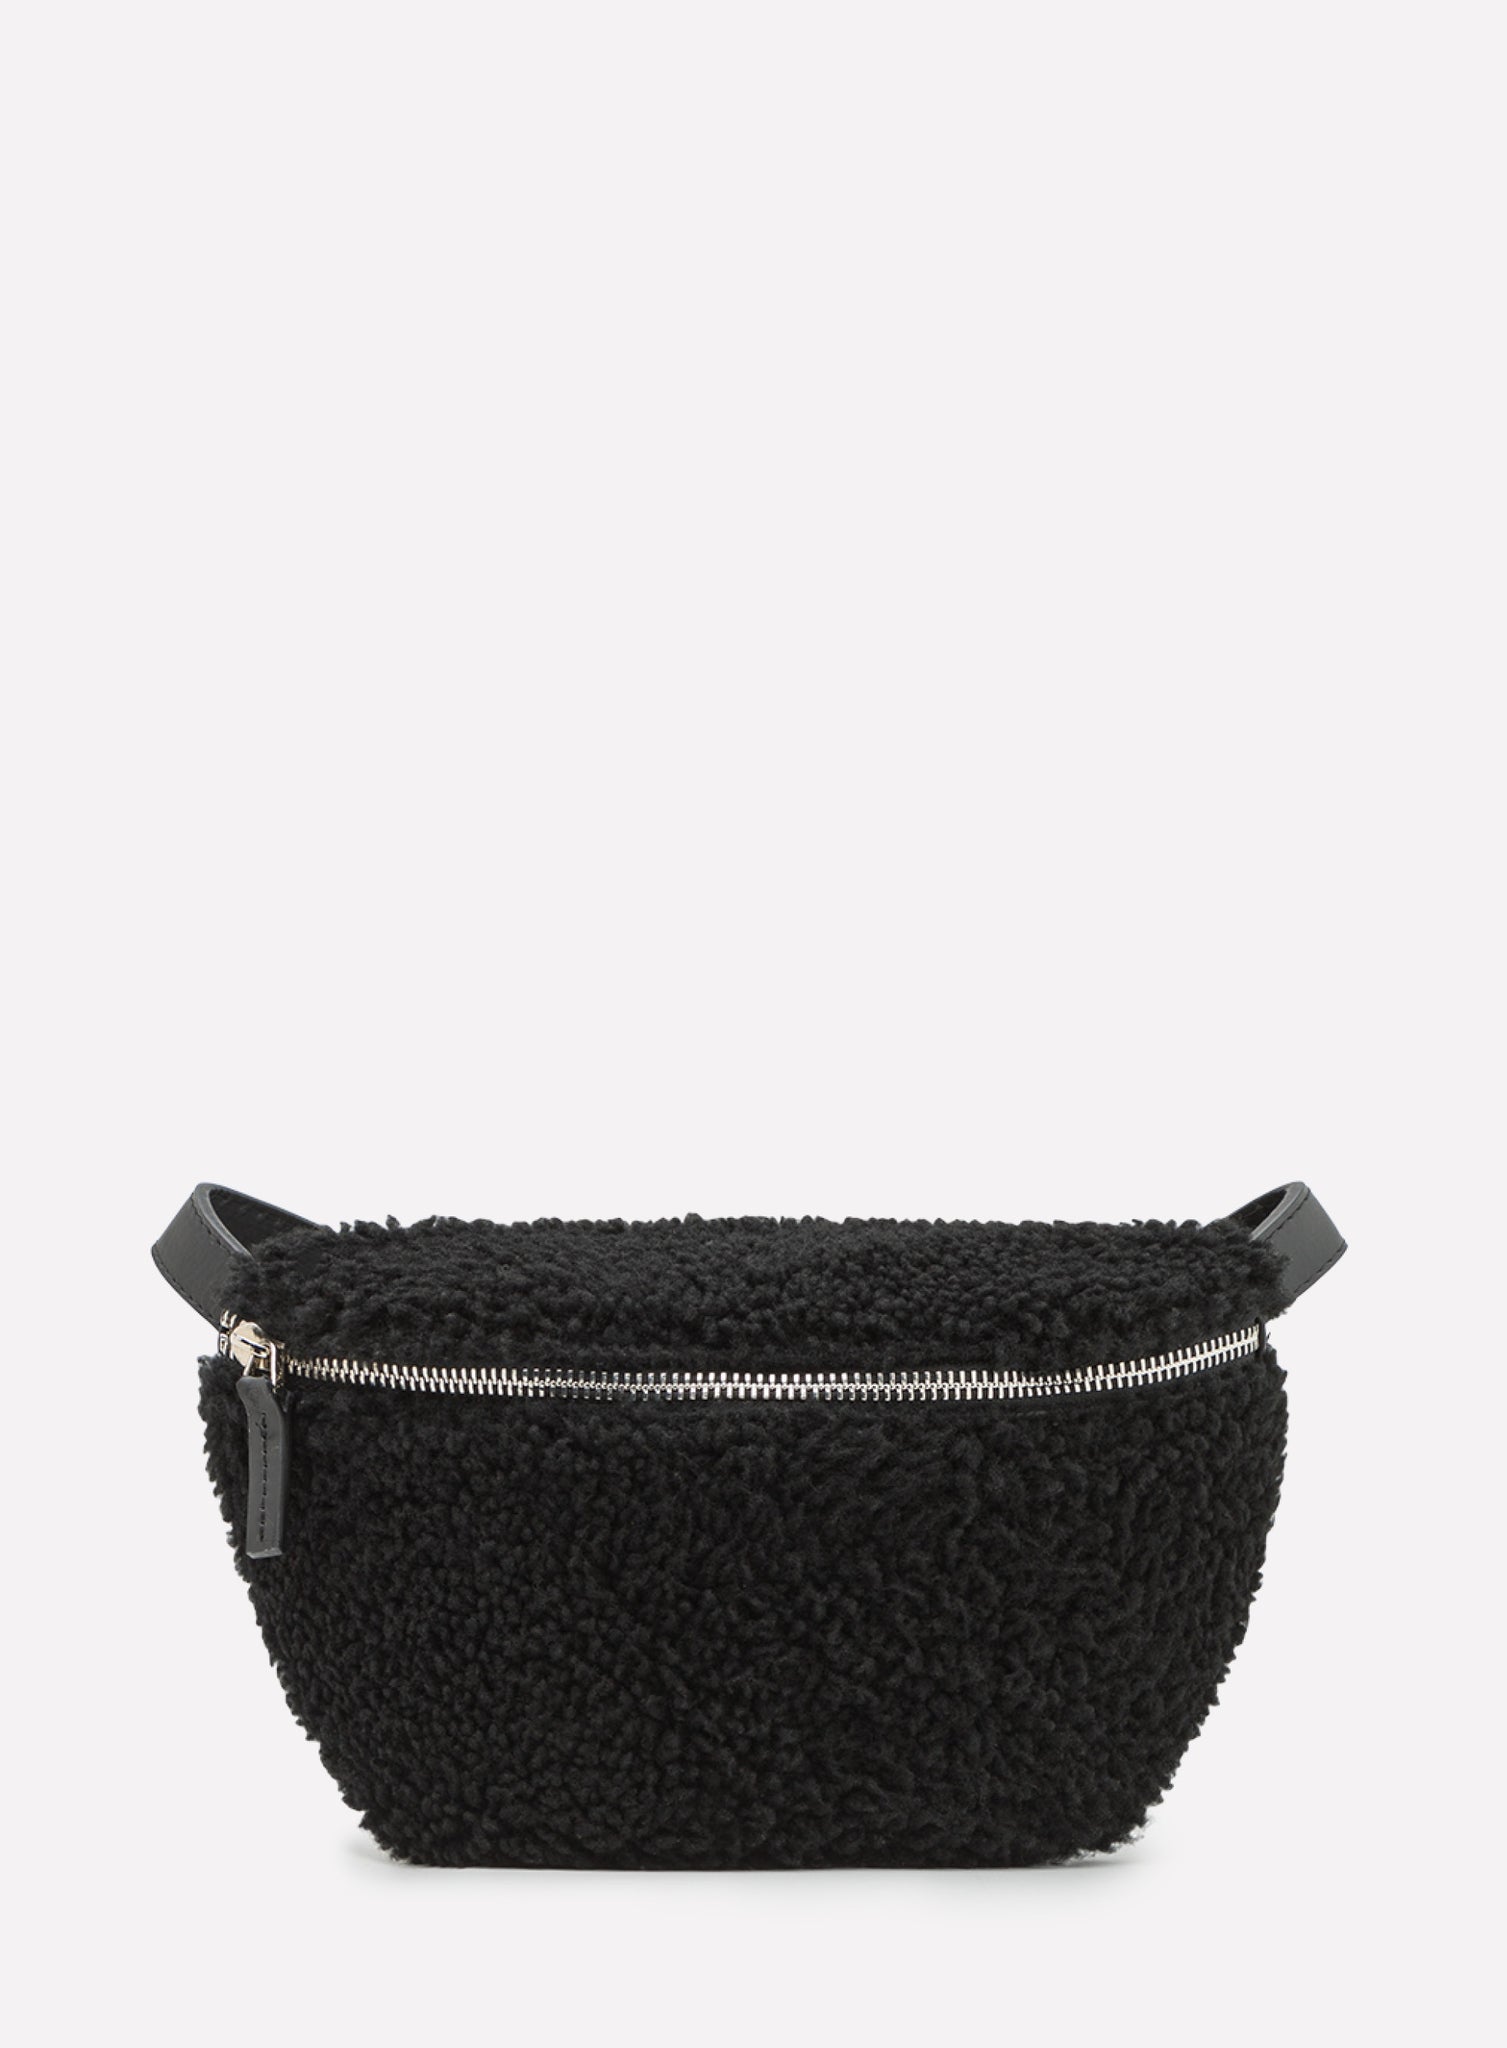 HIP_BAG_CAN_Shearling_Black_Designed_in_Berlin_Made_to_last_Handmade_in_Poland.